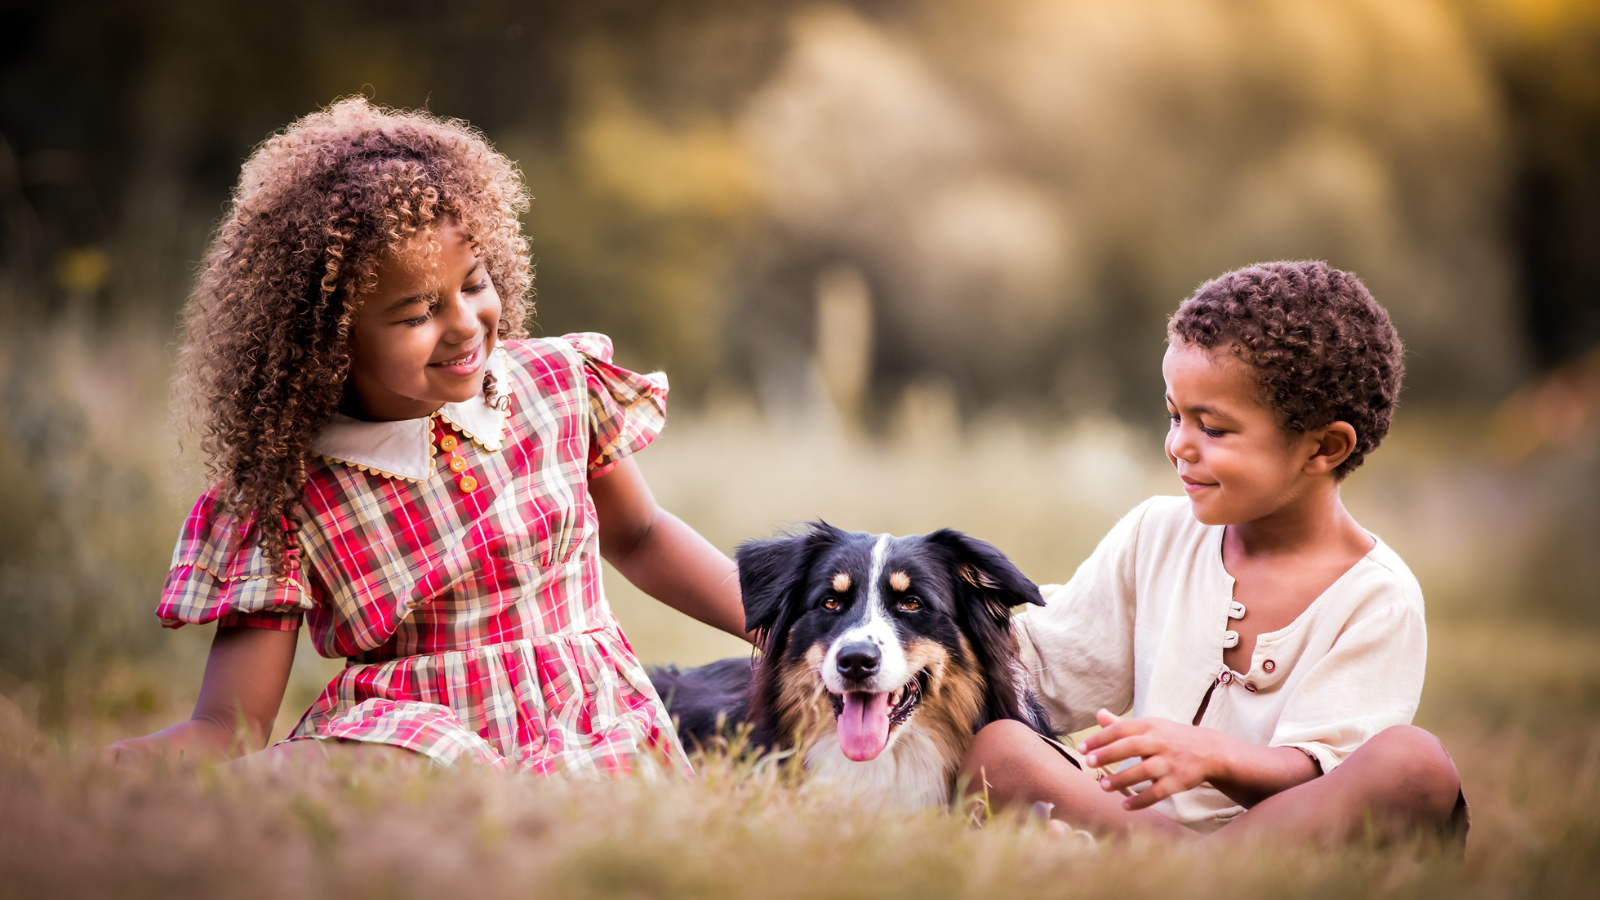 An African American little girl with curly hair, and an African American little boy sitting in the grass with a dog that is black, brown, and white